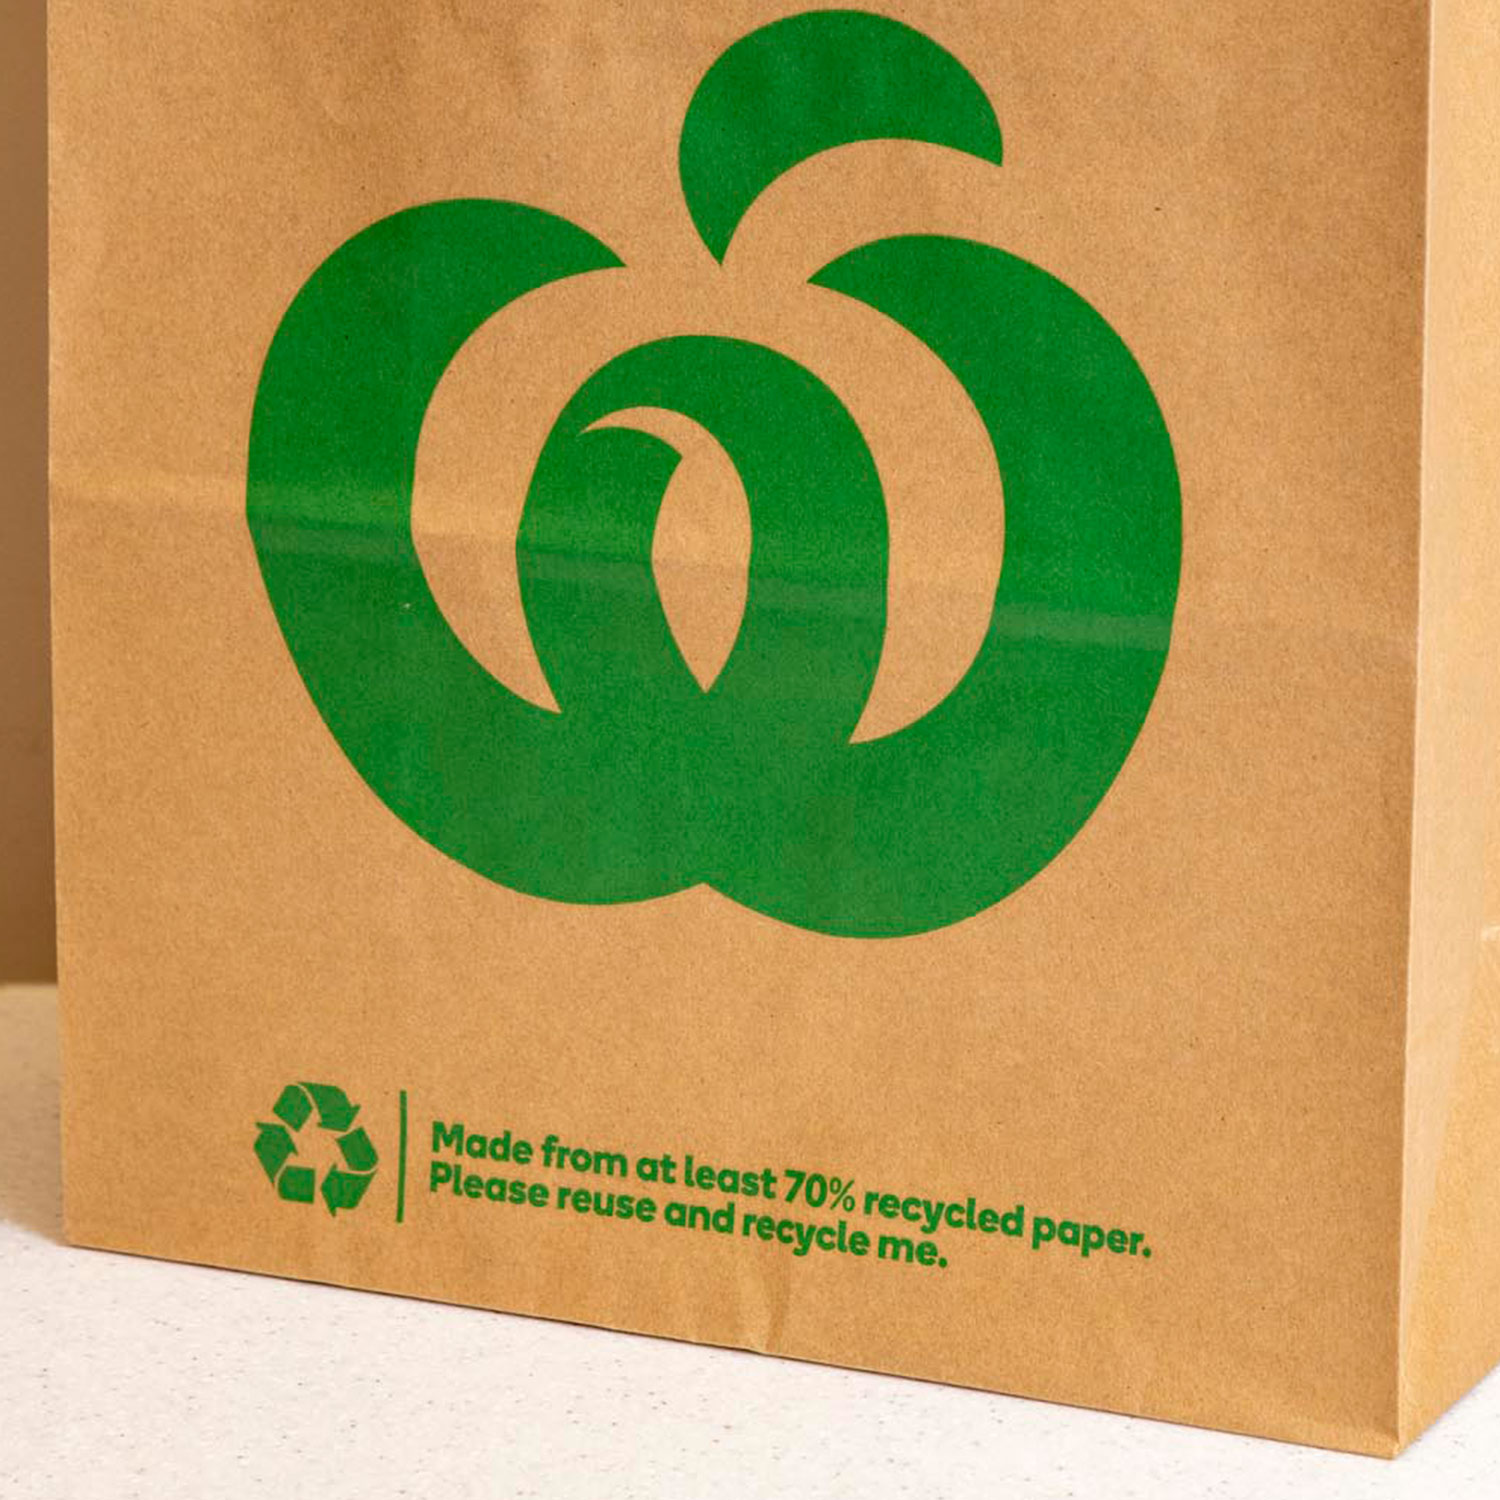 Image of Woolworths paper carry bag by Detpak